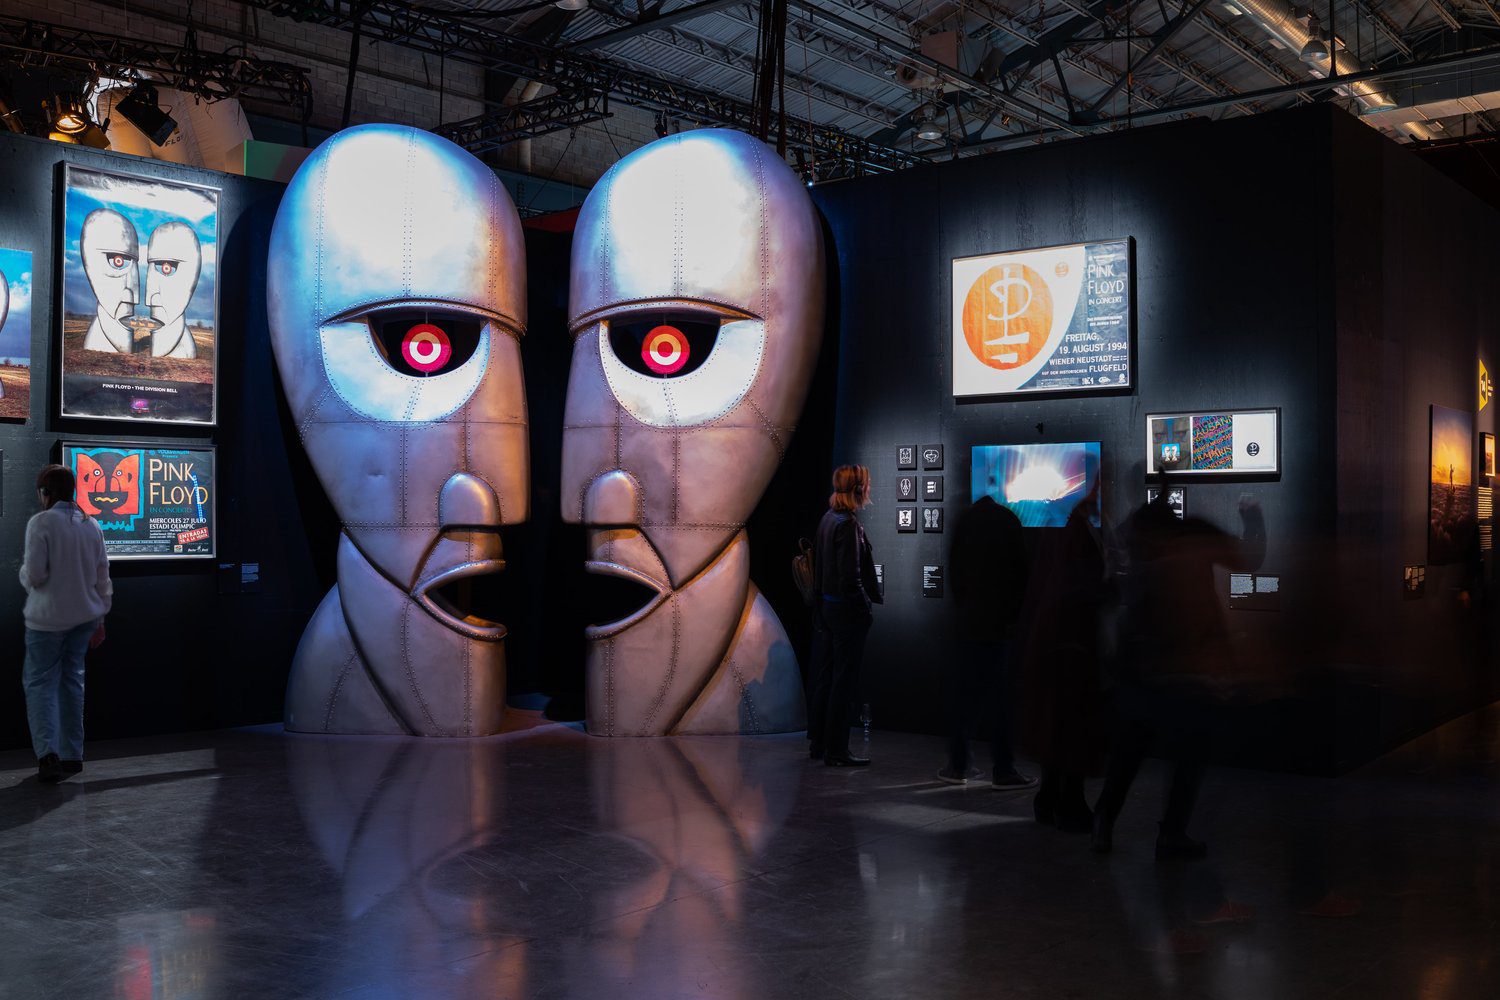 Pink Floyd Exhibition: (Picking at) Their Mortal Remains